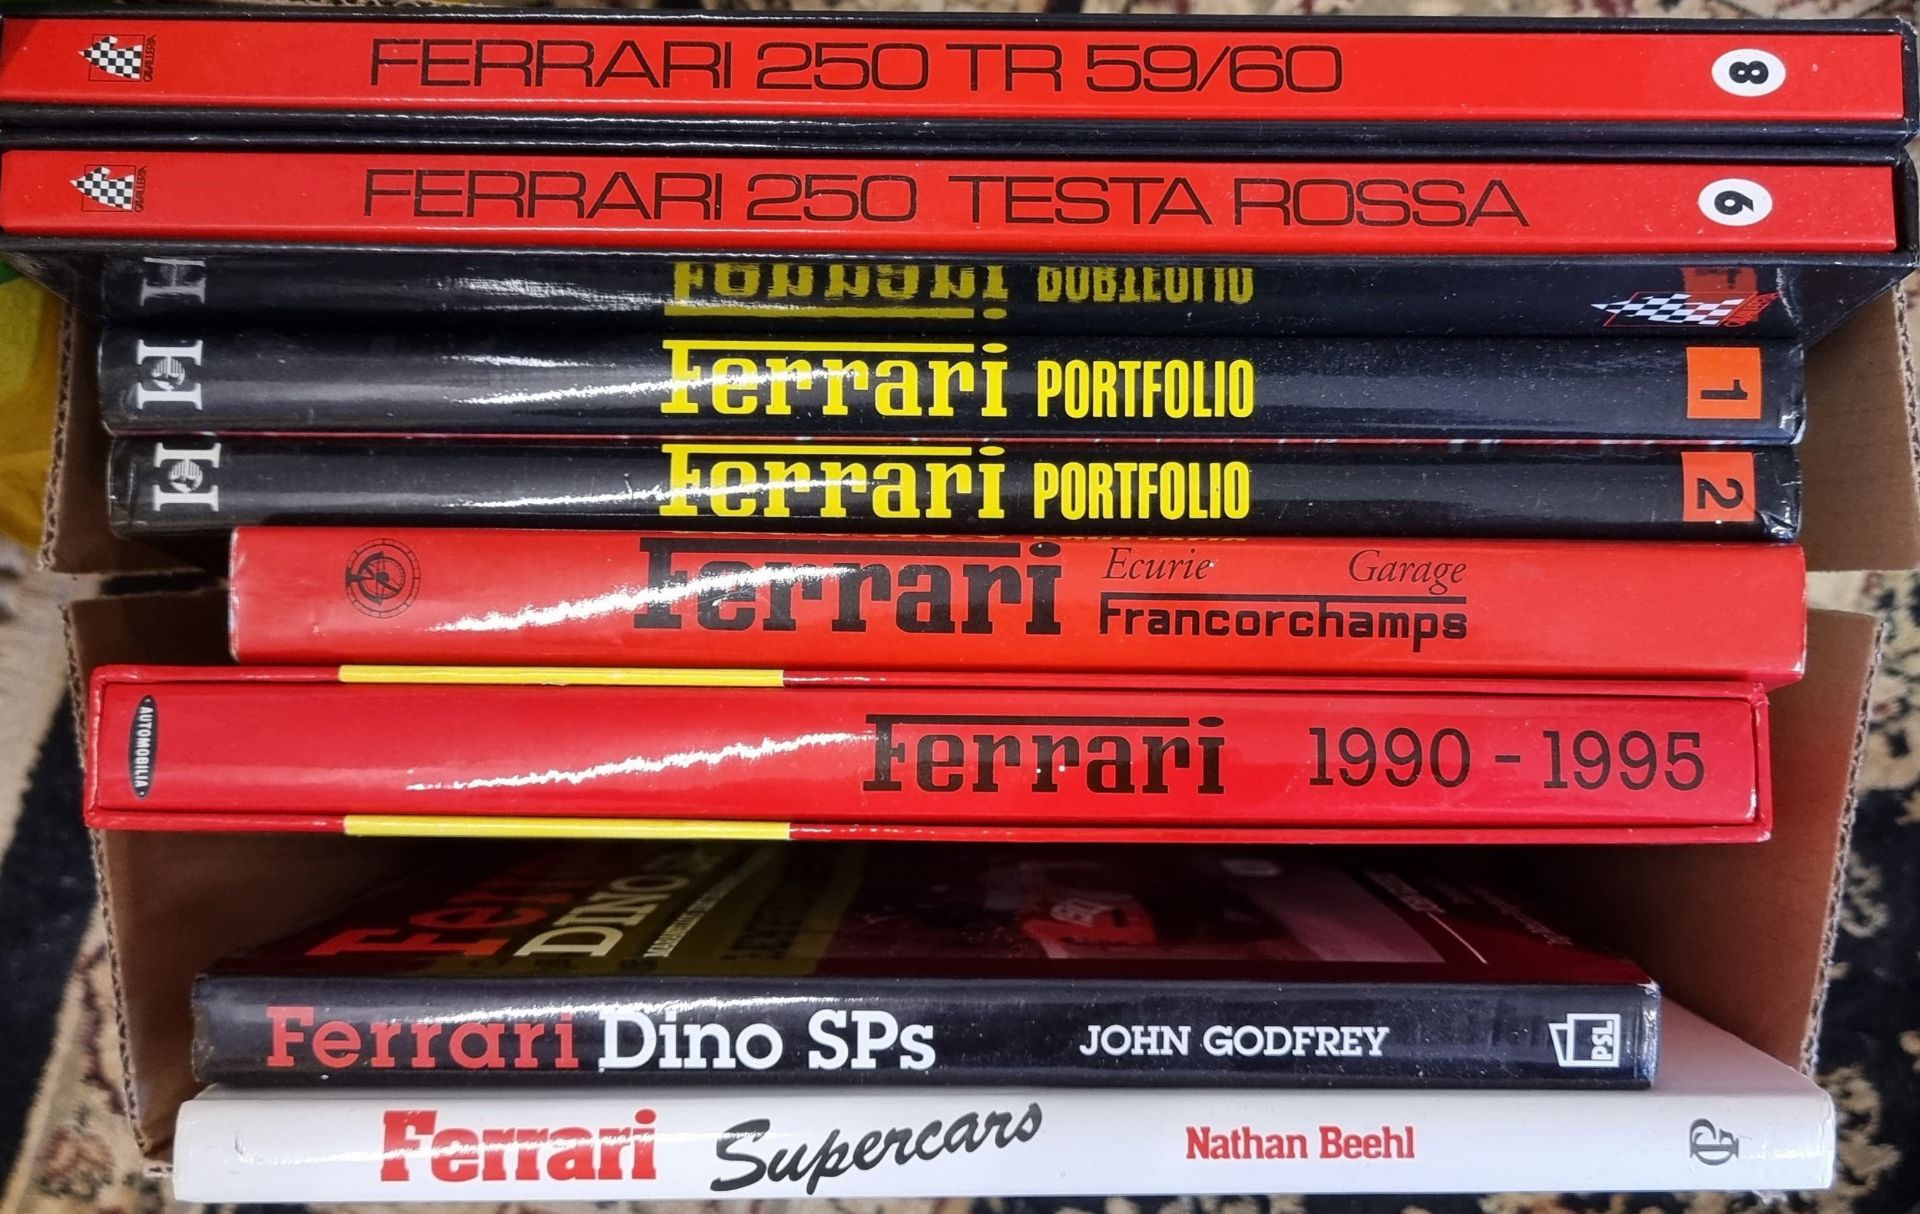 A collection of 22 books related to Ferraris, including Ferrari Ecurie Garage by Nada and Ferrari